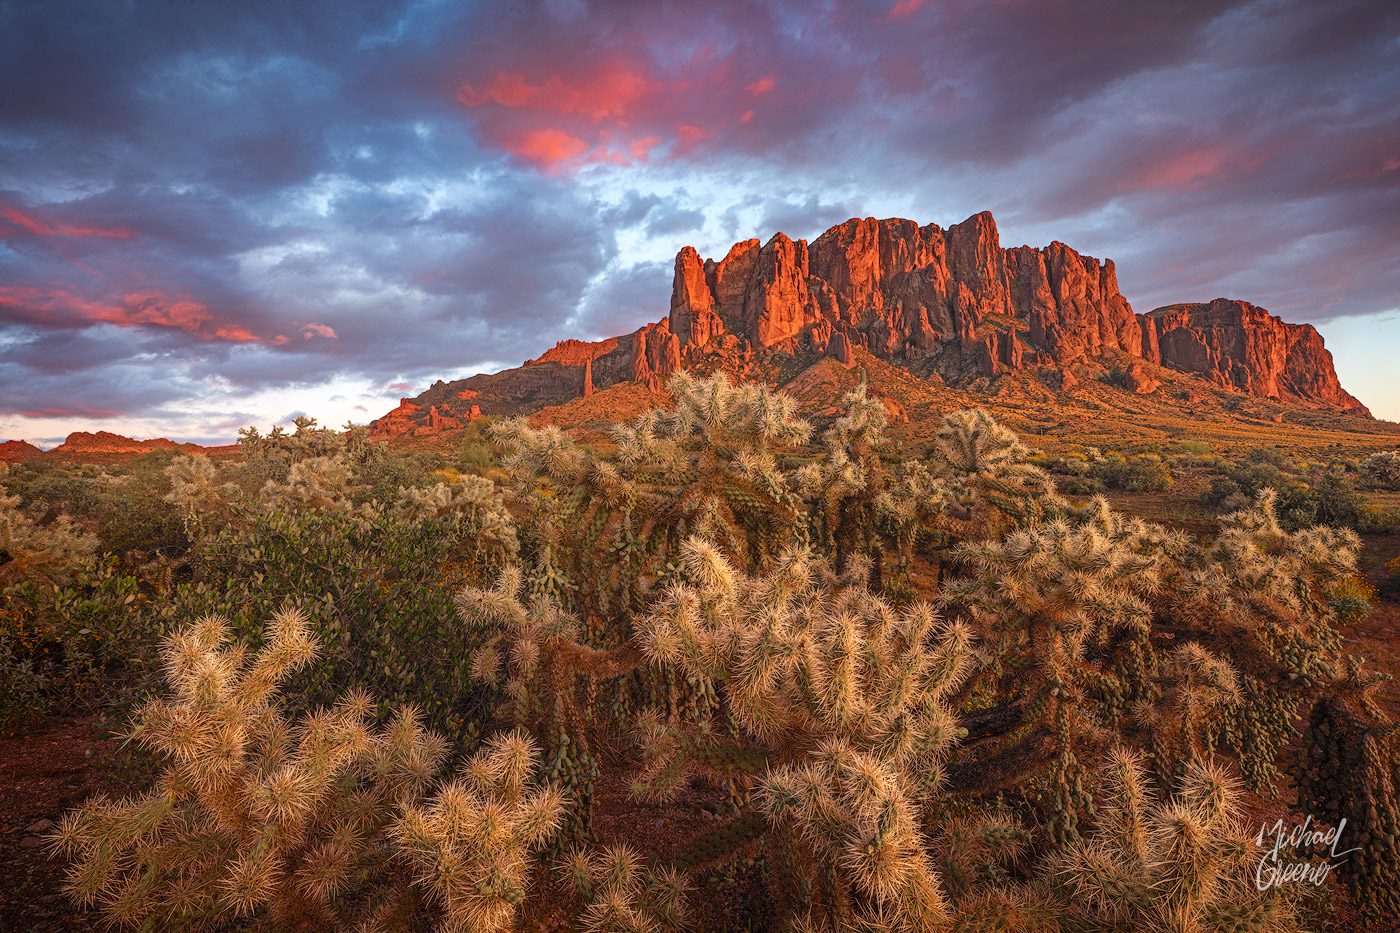 A day of spectacular conditions comes to a close with sunset spots of pink dotting the sky. The Superstition Mountains are located...